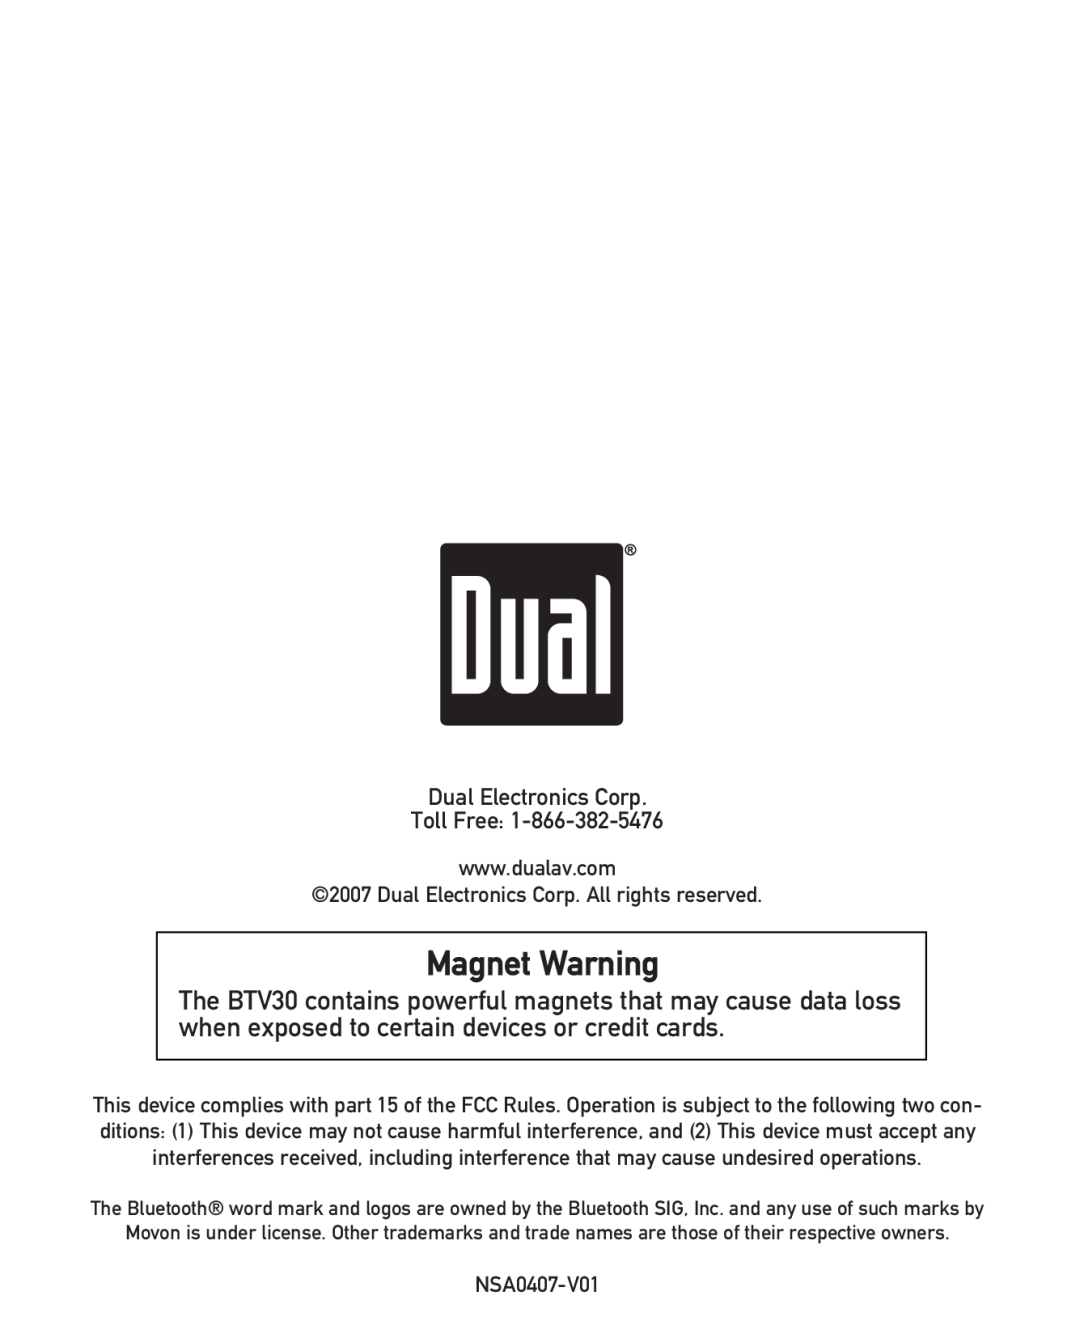 Dual BTV30 owner manual Magnet Warning, Dual Electronics Corp. All rights reserved, NSA0407-V01 